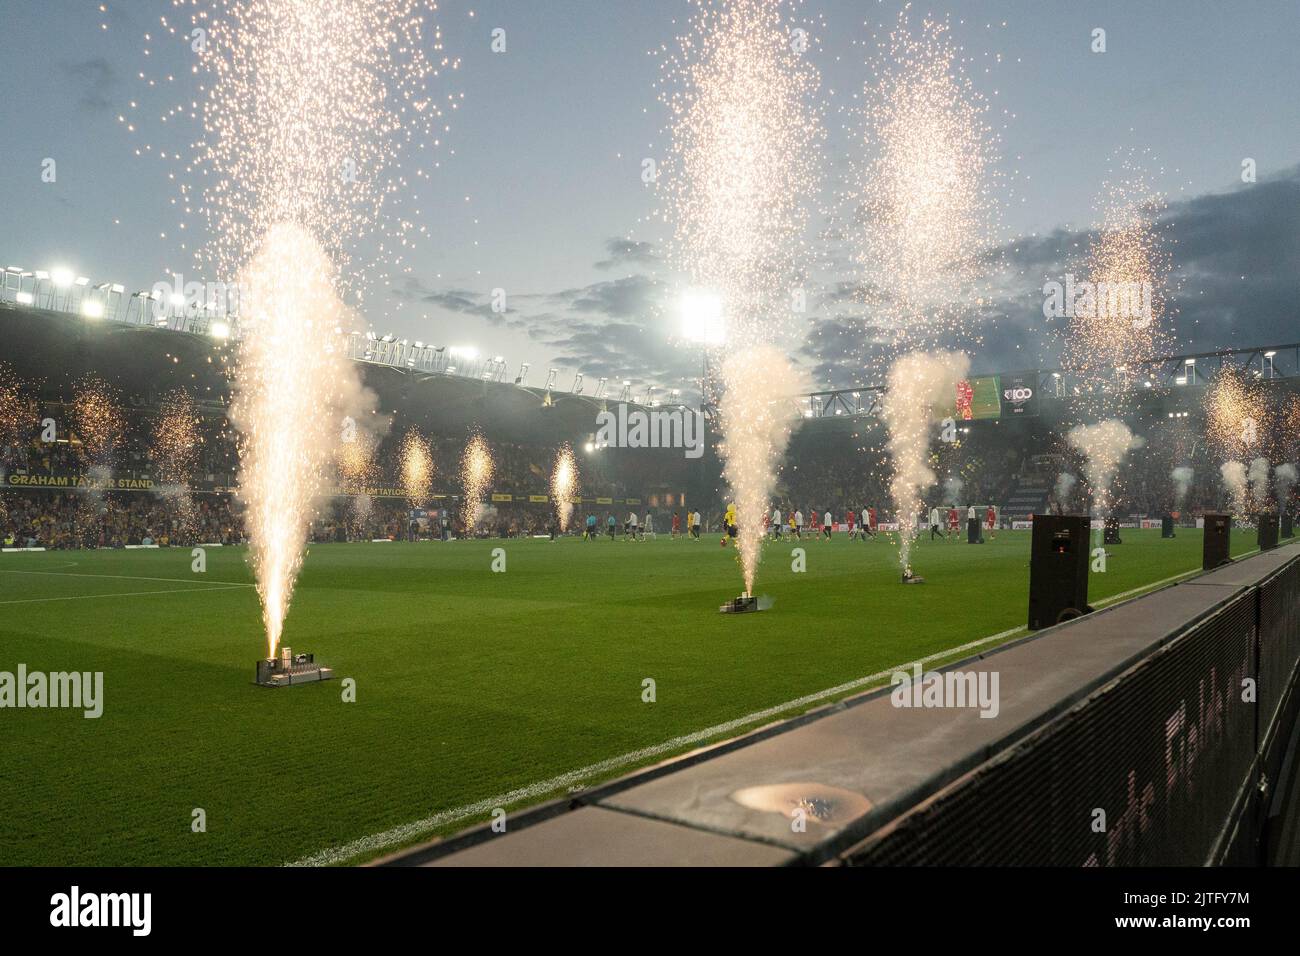 Middlesbrough and Watford team walk on to a Firework display to celebrate 100 years at Vicarage Road for Watford Stock Photo